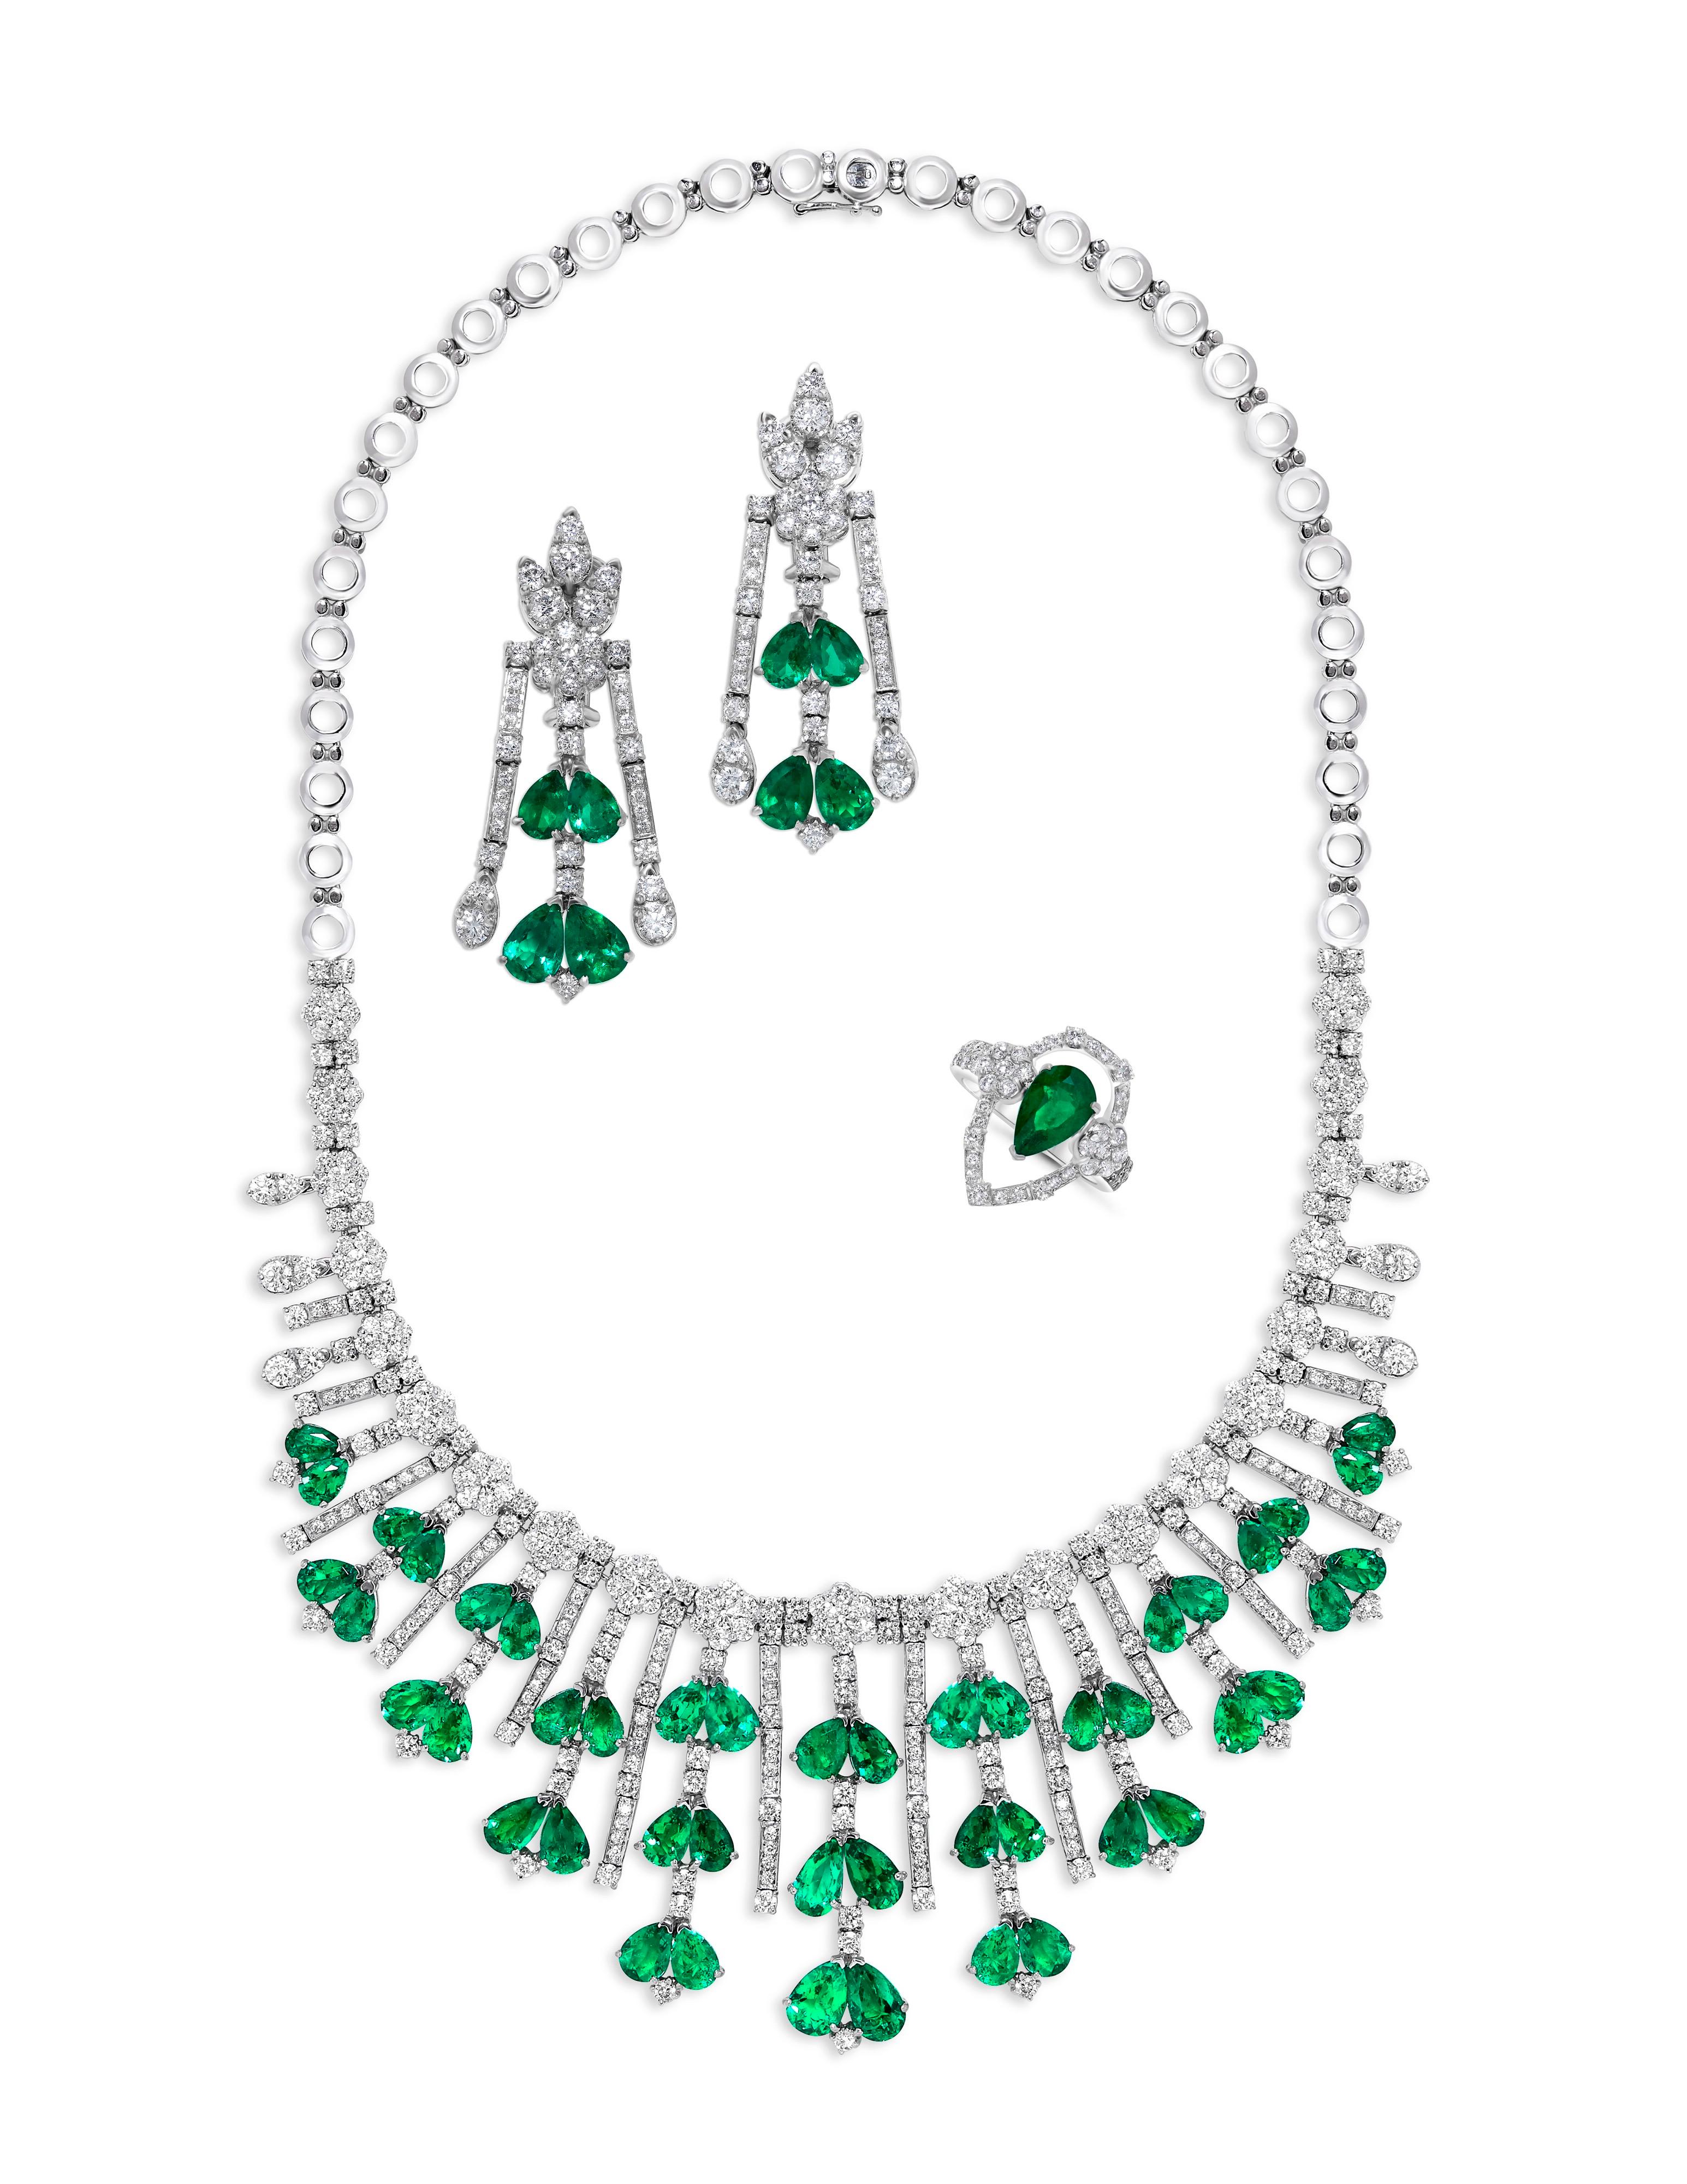 From the Emilio Jewelry Museum Vault in New York at wholesale prices,
Please inquire for details. 
Emeralds: Approximately 32.90cts
Diamonds: 20.40cts
